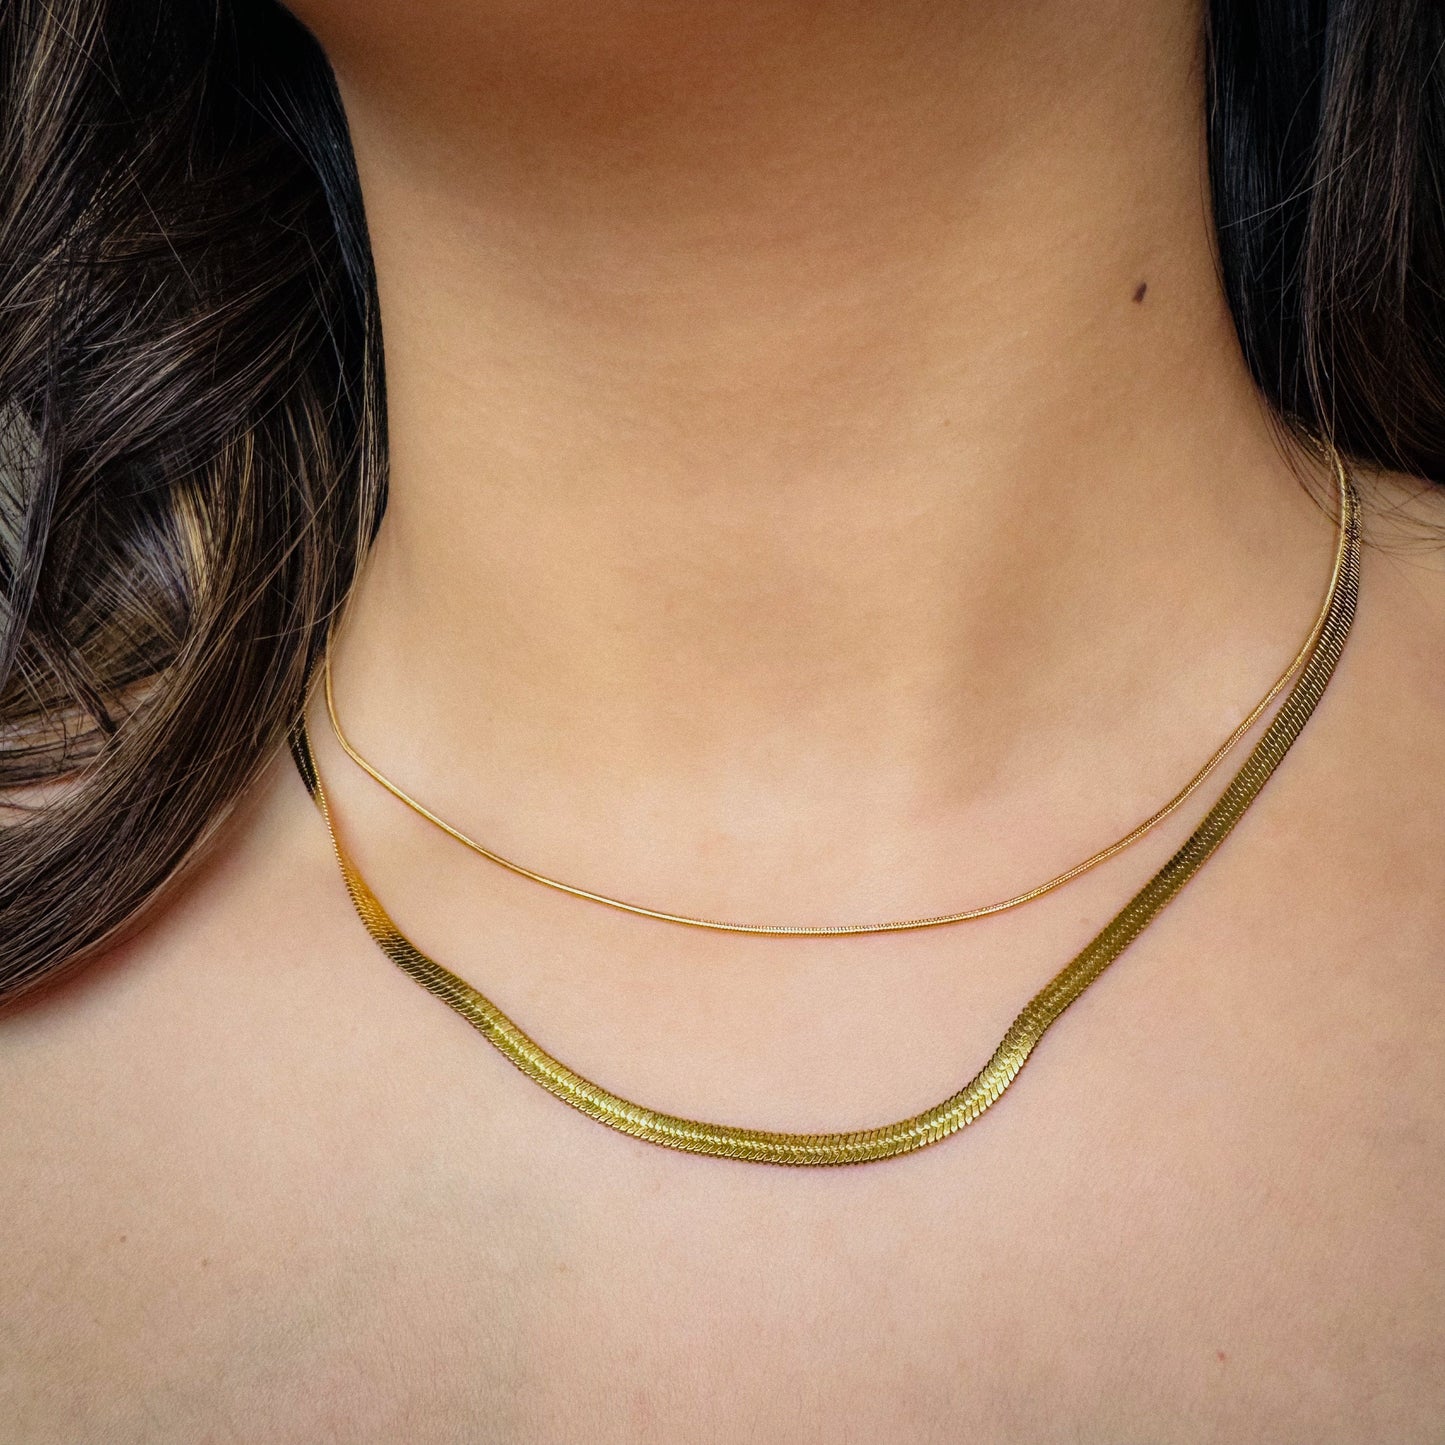 Double Layered Herringbone Chain Necklace-Find trendy Double-Layered Herringbone Chain Necklace designs. Elevate your look with our stylish collection. Don't wait, shop now for a fashionable statement!-Dazzledvenus